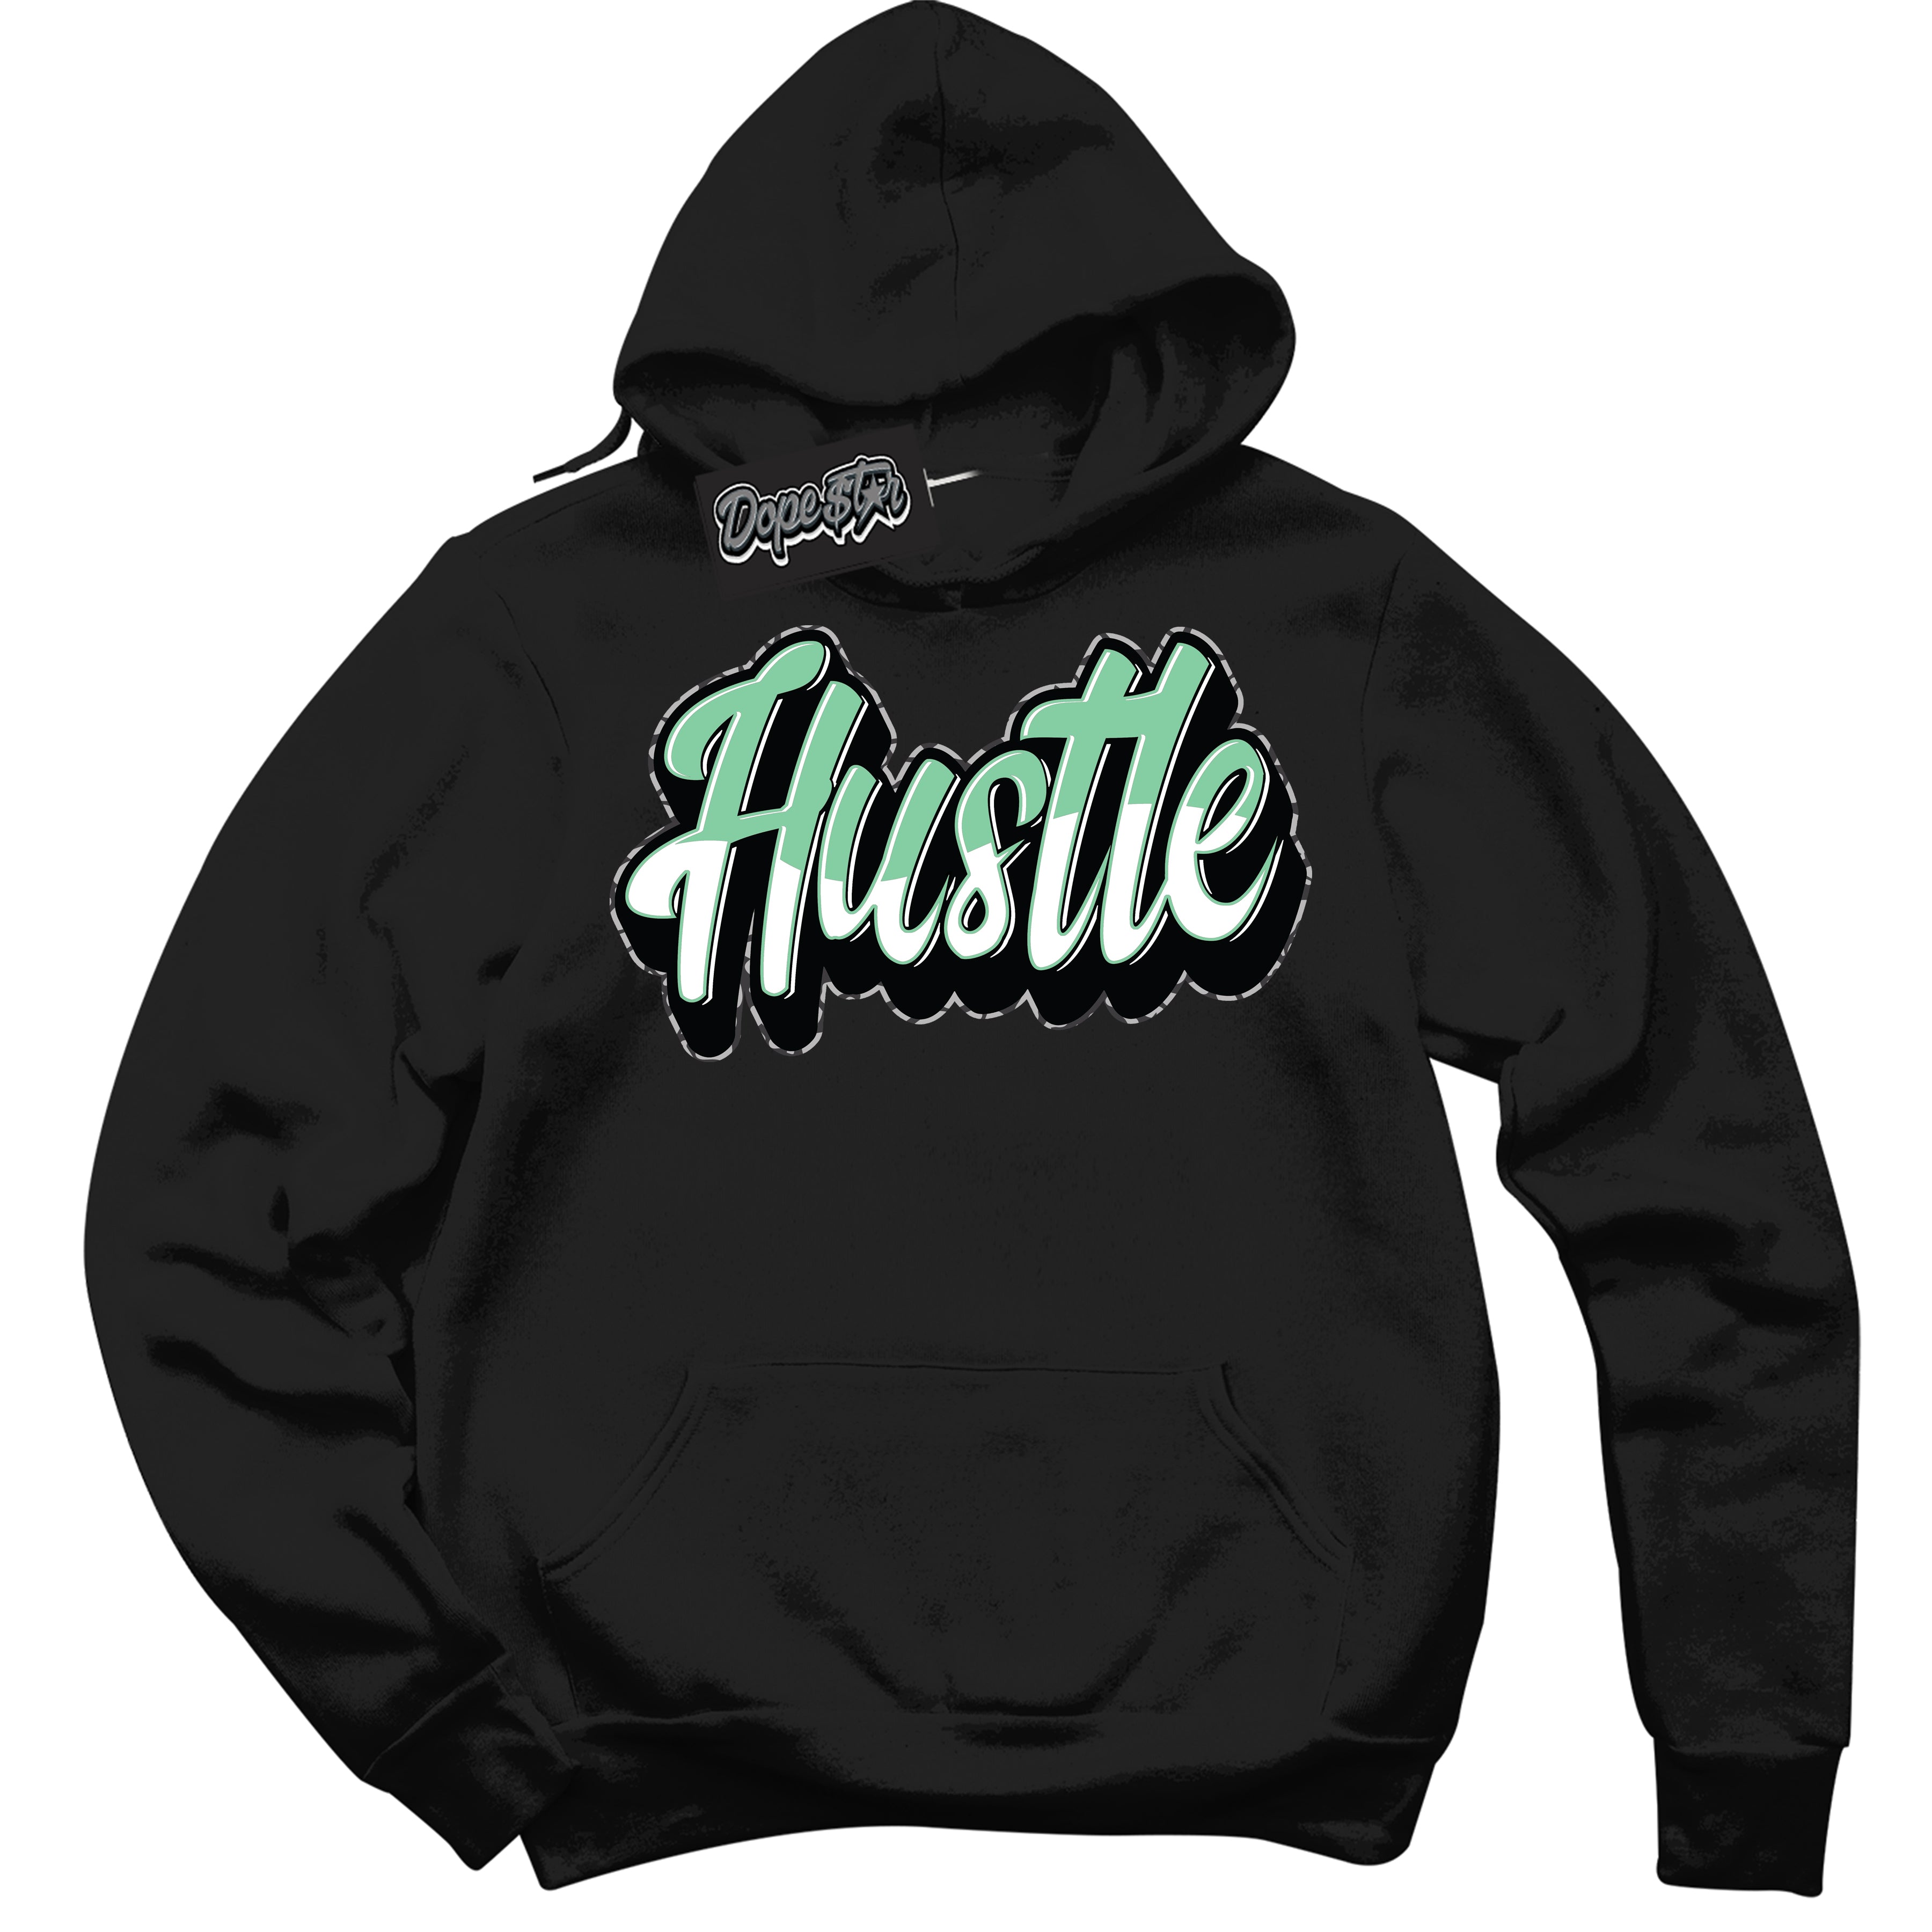 Cool Black Graphic DopeStar Hoodie with “ Hustle 2 “ print, that perfectly matches Green Glow 3S sneakers